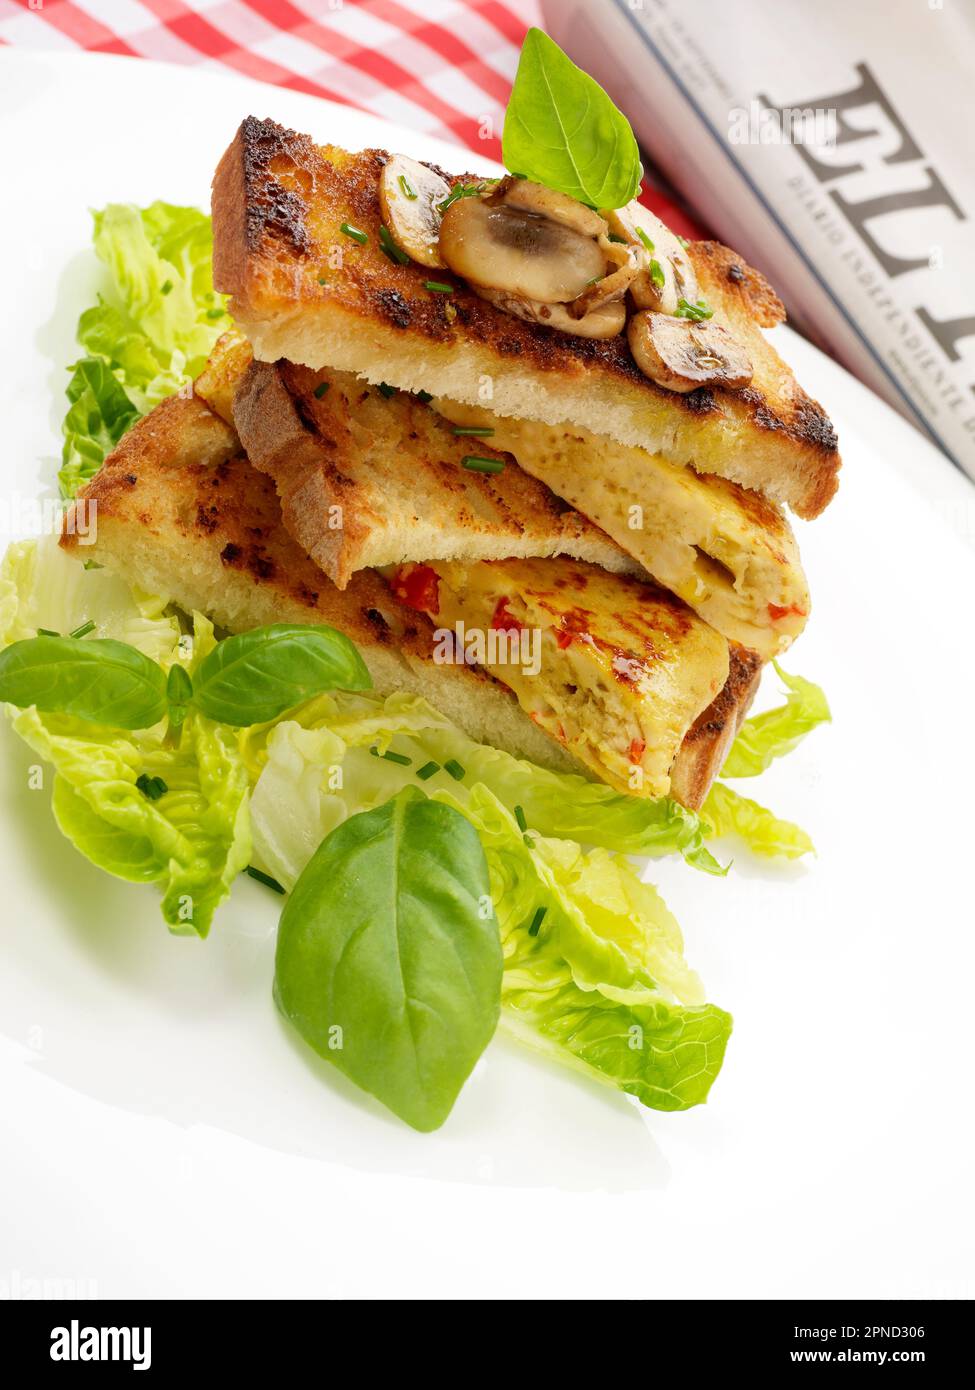 Spanish omelette sandwich with basil and mushrooms Stock Photo